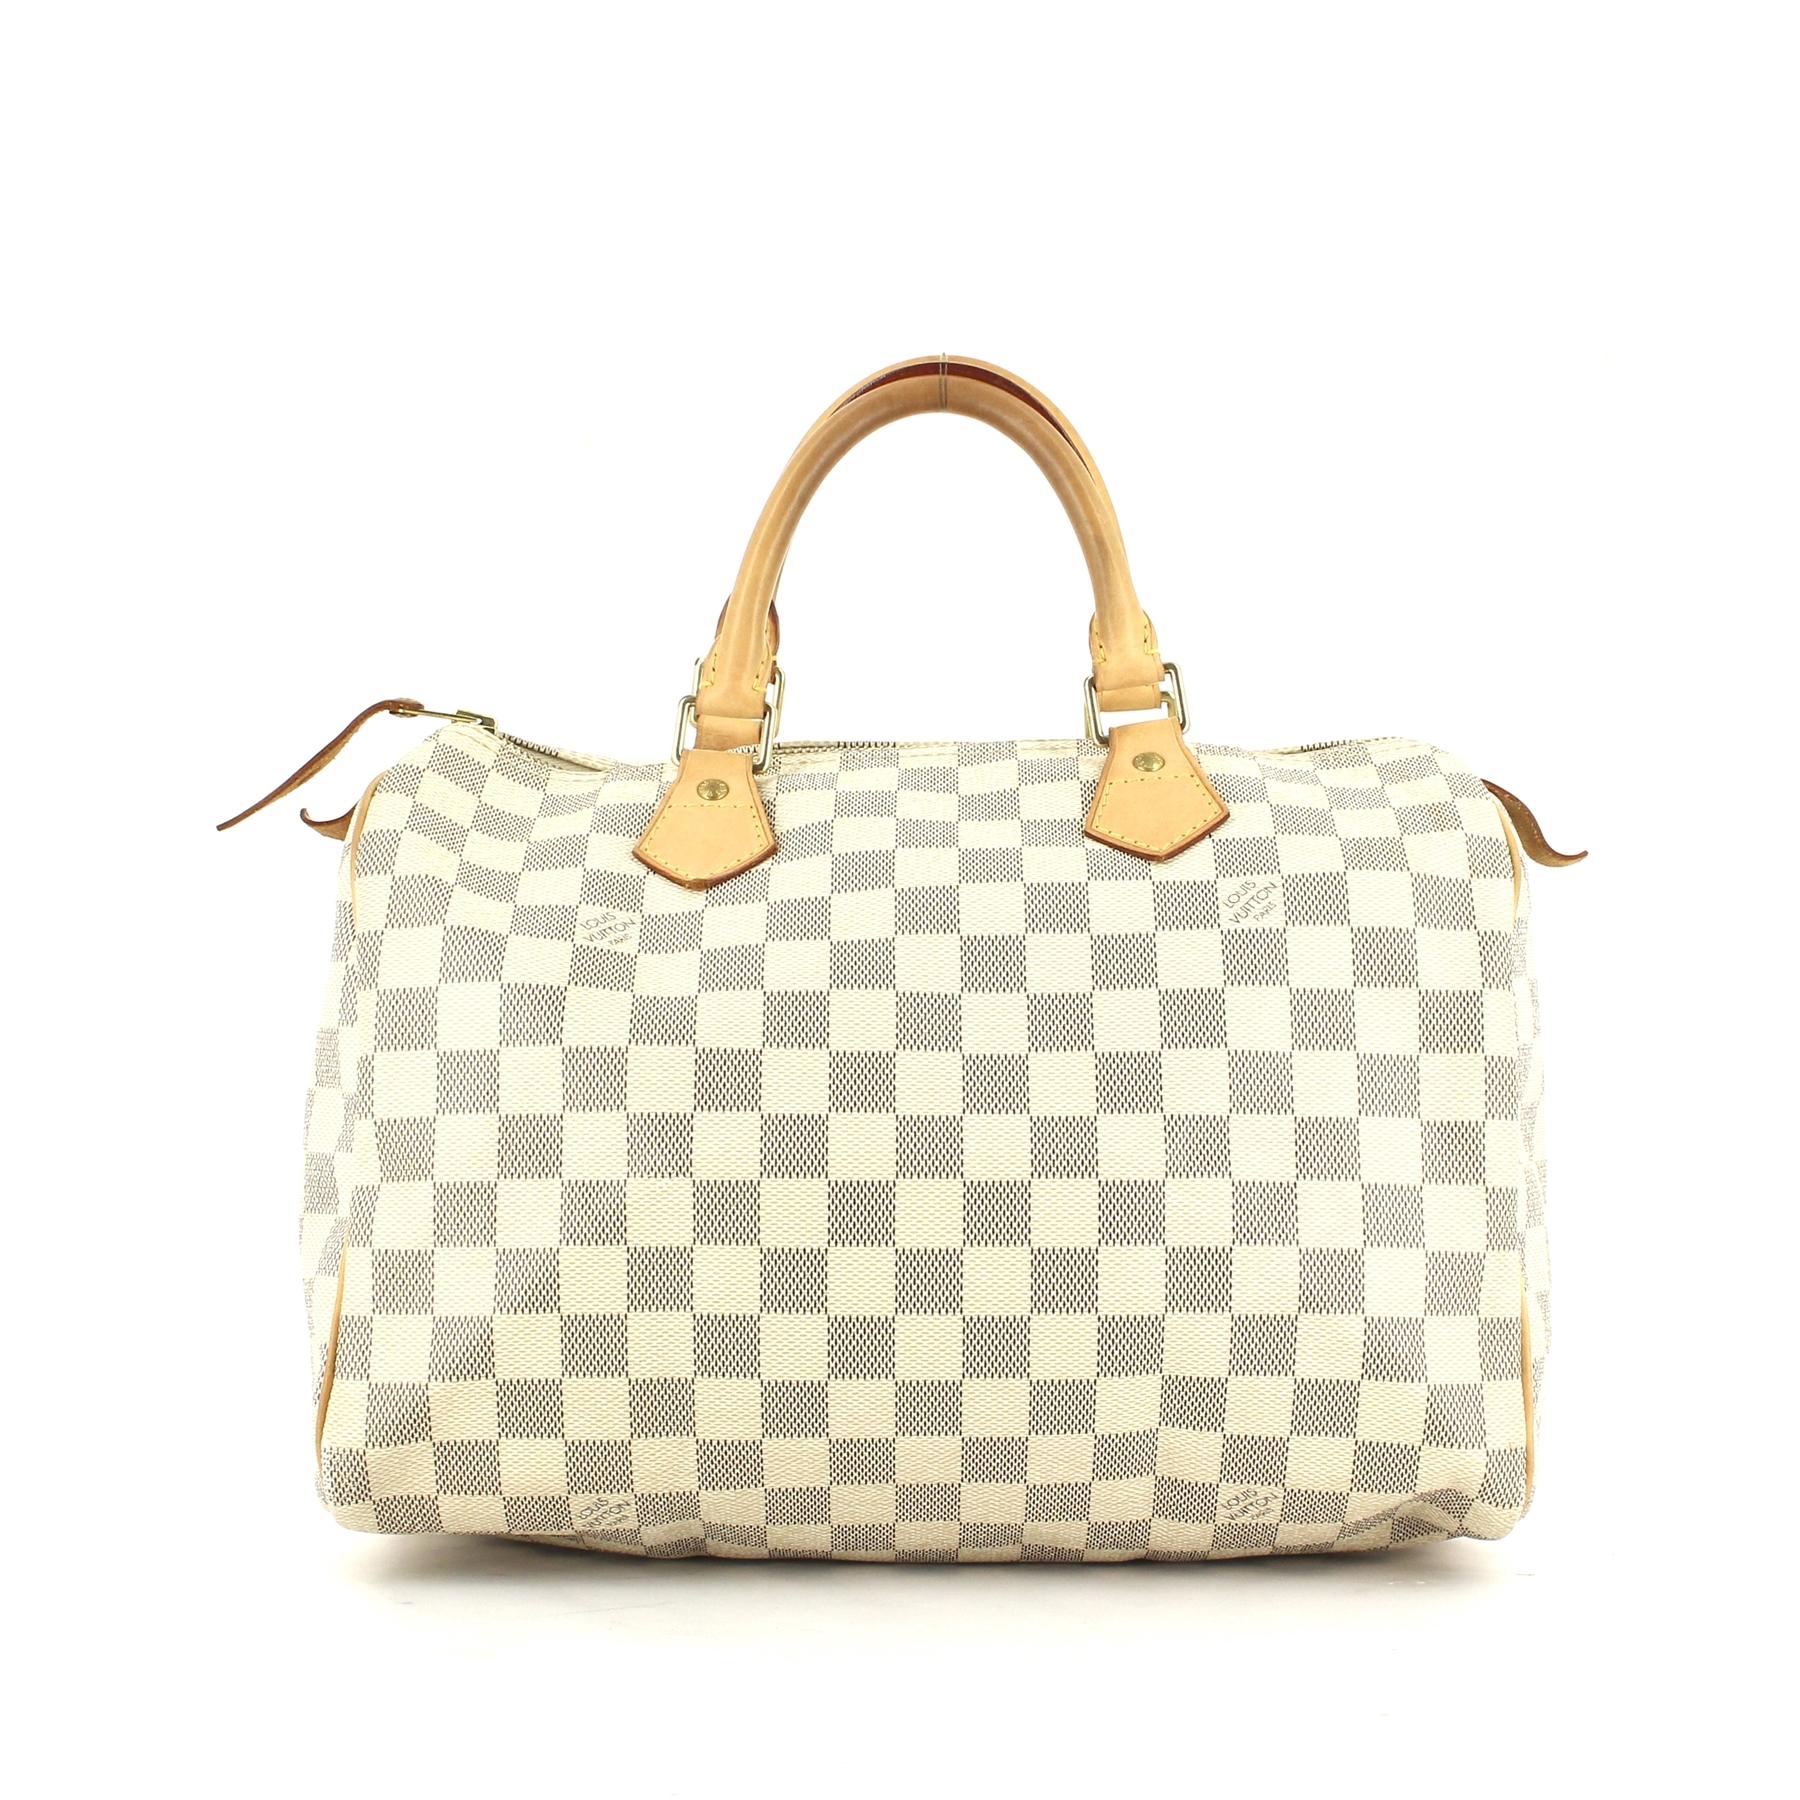 Les Sac Louis Vuitton 2016 | Confederated Tribes of the Umatilla Indian Reservation